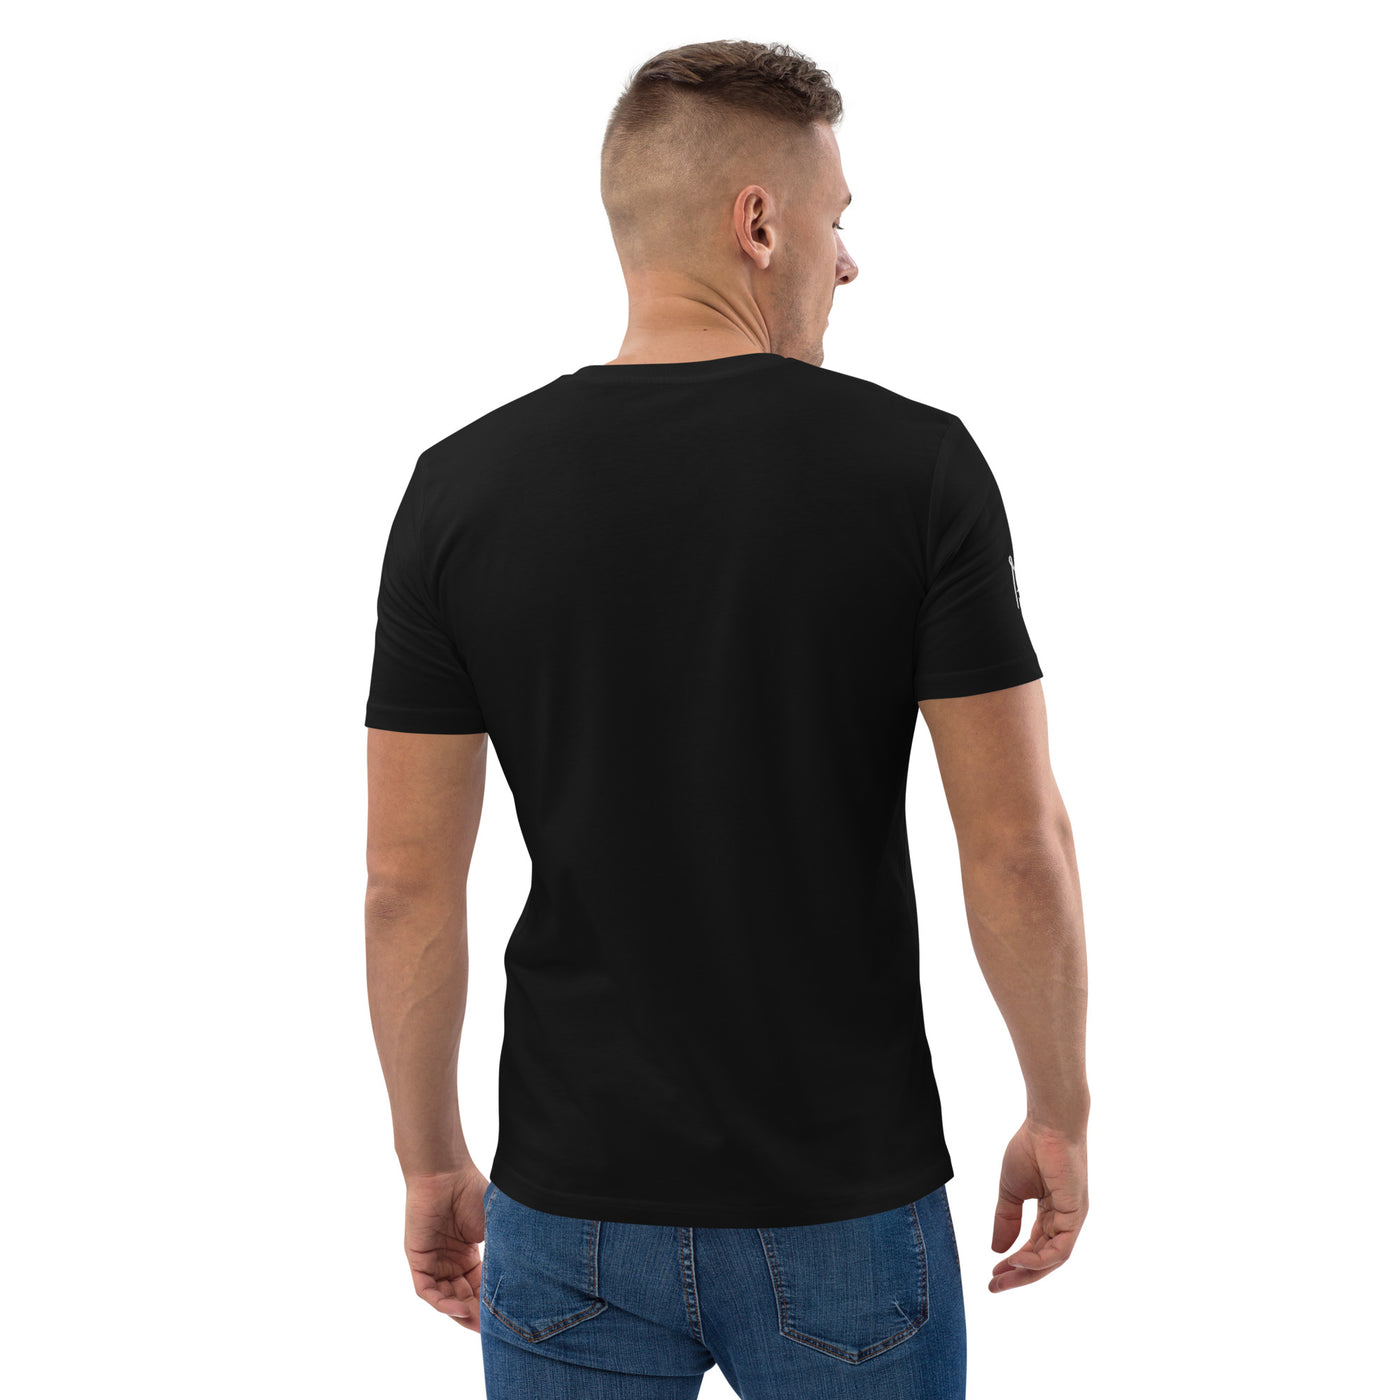 Freedom Embroidered Unisex T-Shirt